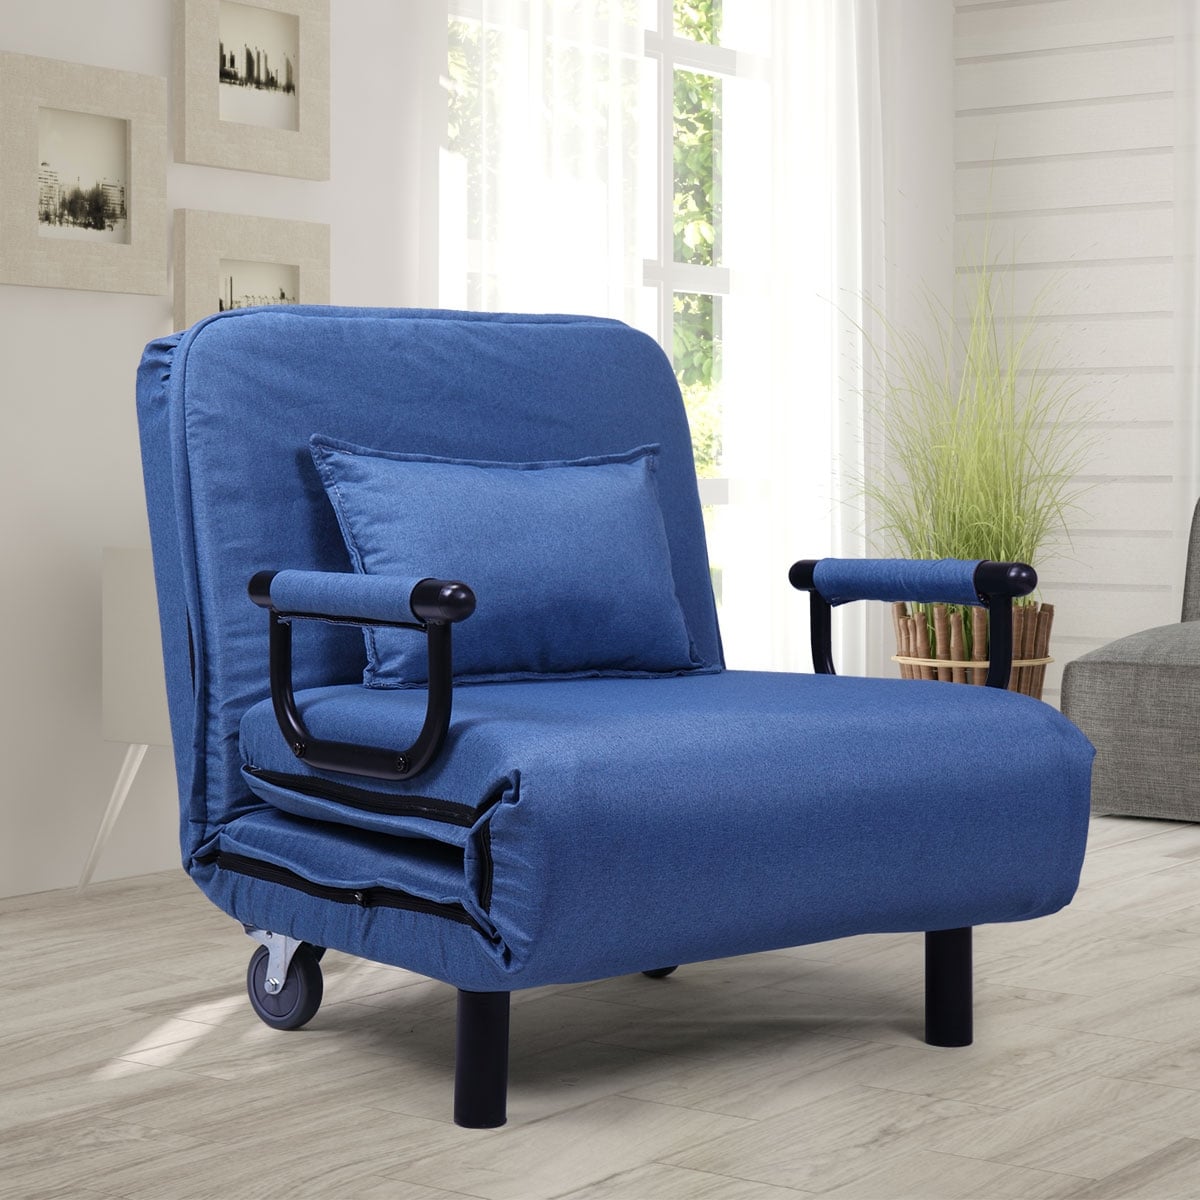 https://ak1.ostkcdn.com/images/products/is/images/direct/3dace320538ddfd1bba489aec3dc9a58853a303e/29.5%27%27-Convertible-Folding-Sofa-Chair-with-Adjustable-Backrest%2C-Wheels%2C-Metal-Legs-and-Pillow-for-Modern-Lounge.jpg